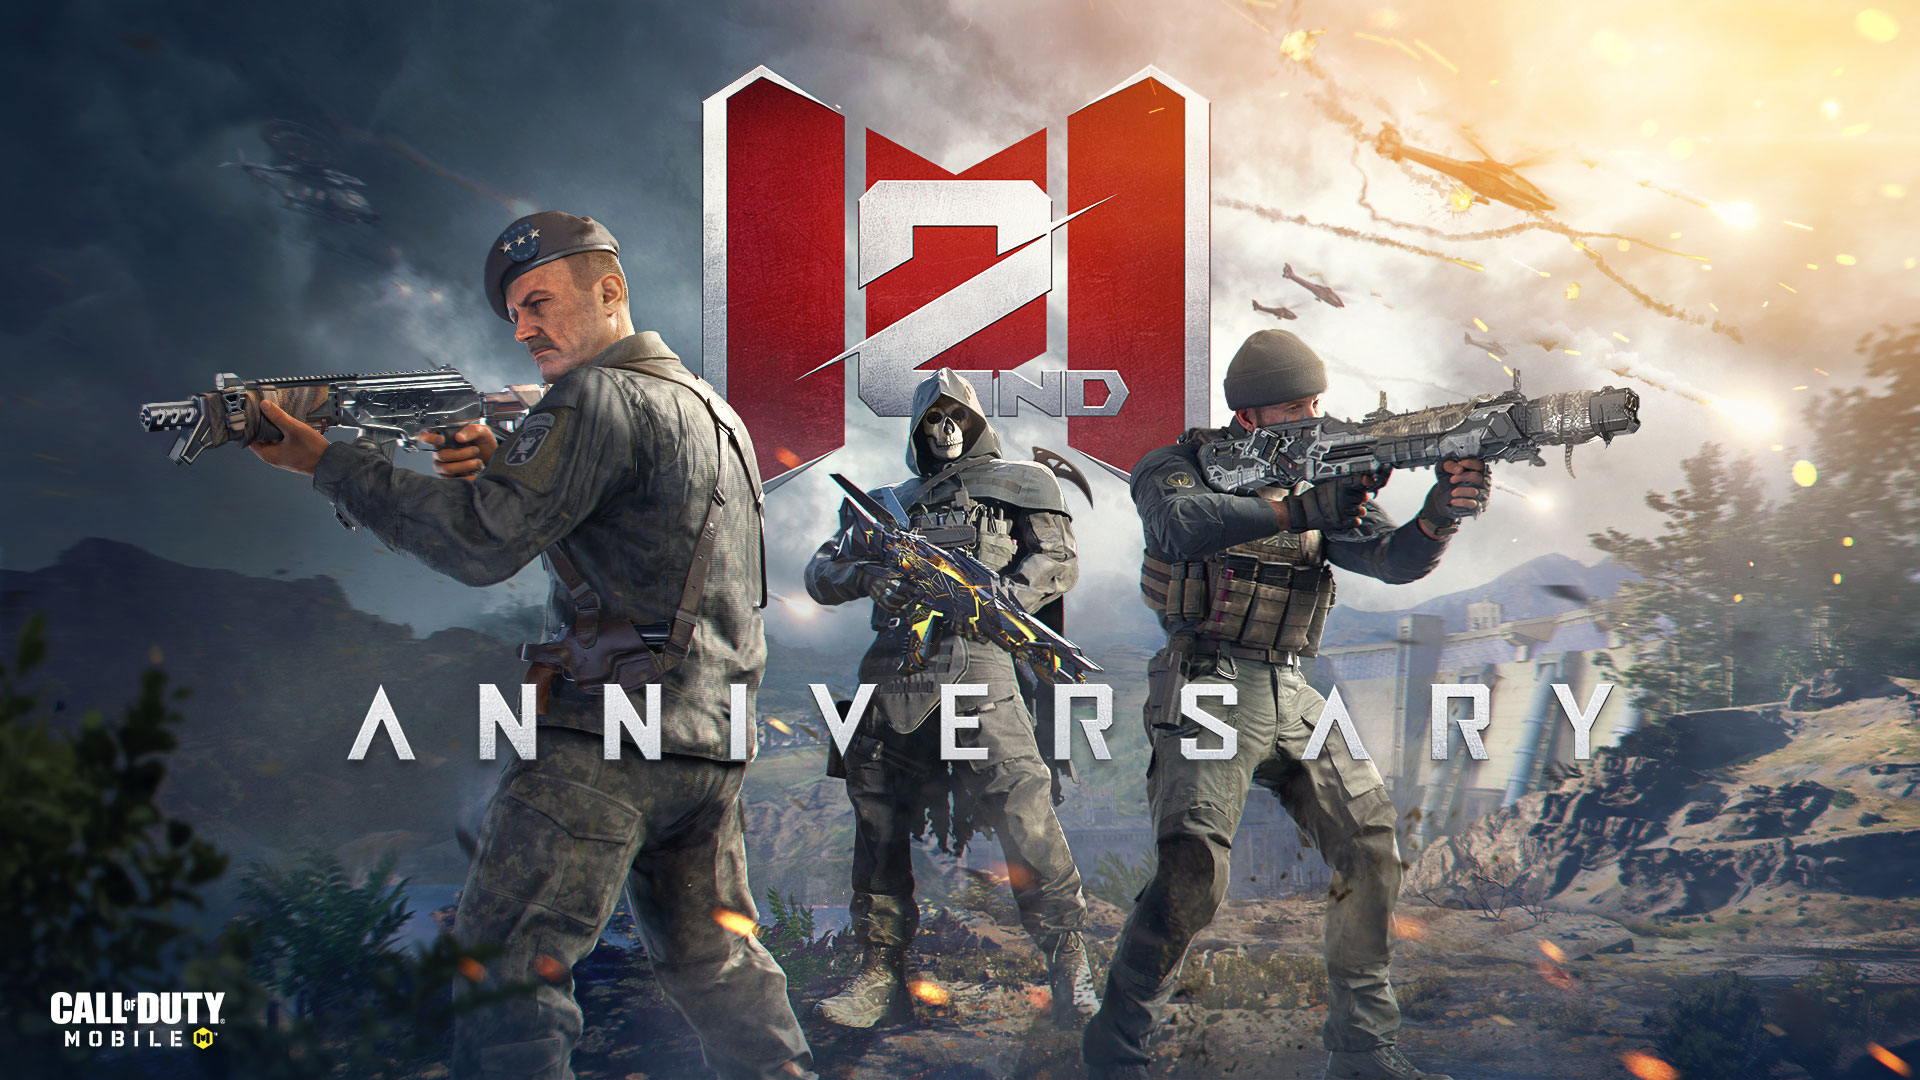 Call of Duty®: Mobile Celebrates its second anniversary with a Major Update in Season 8